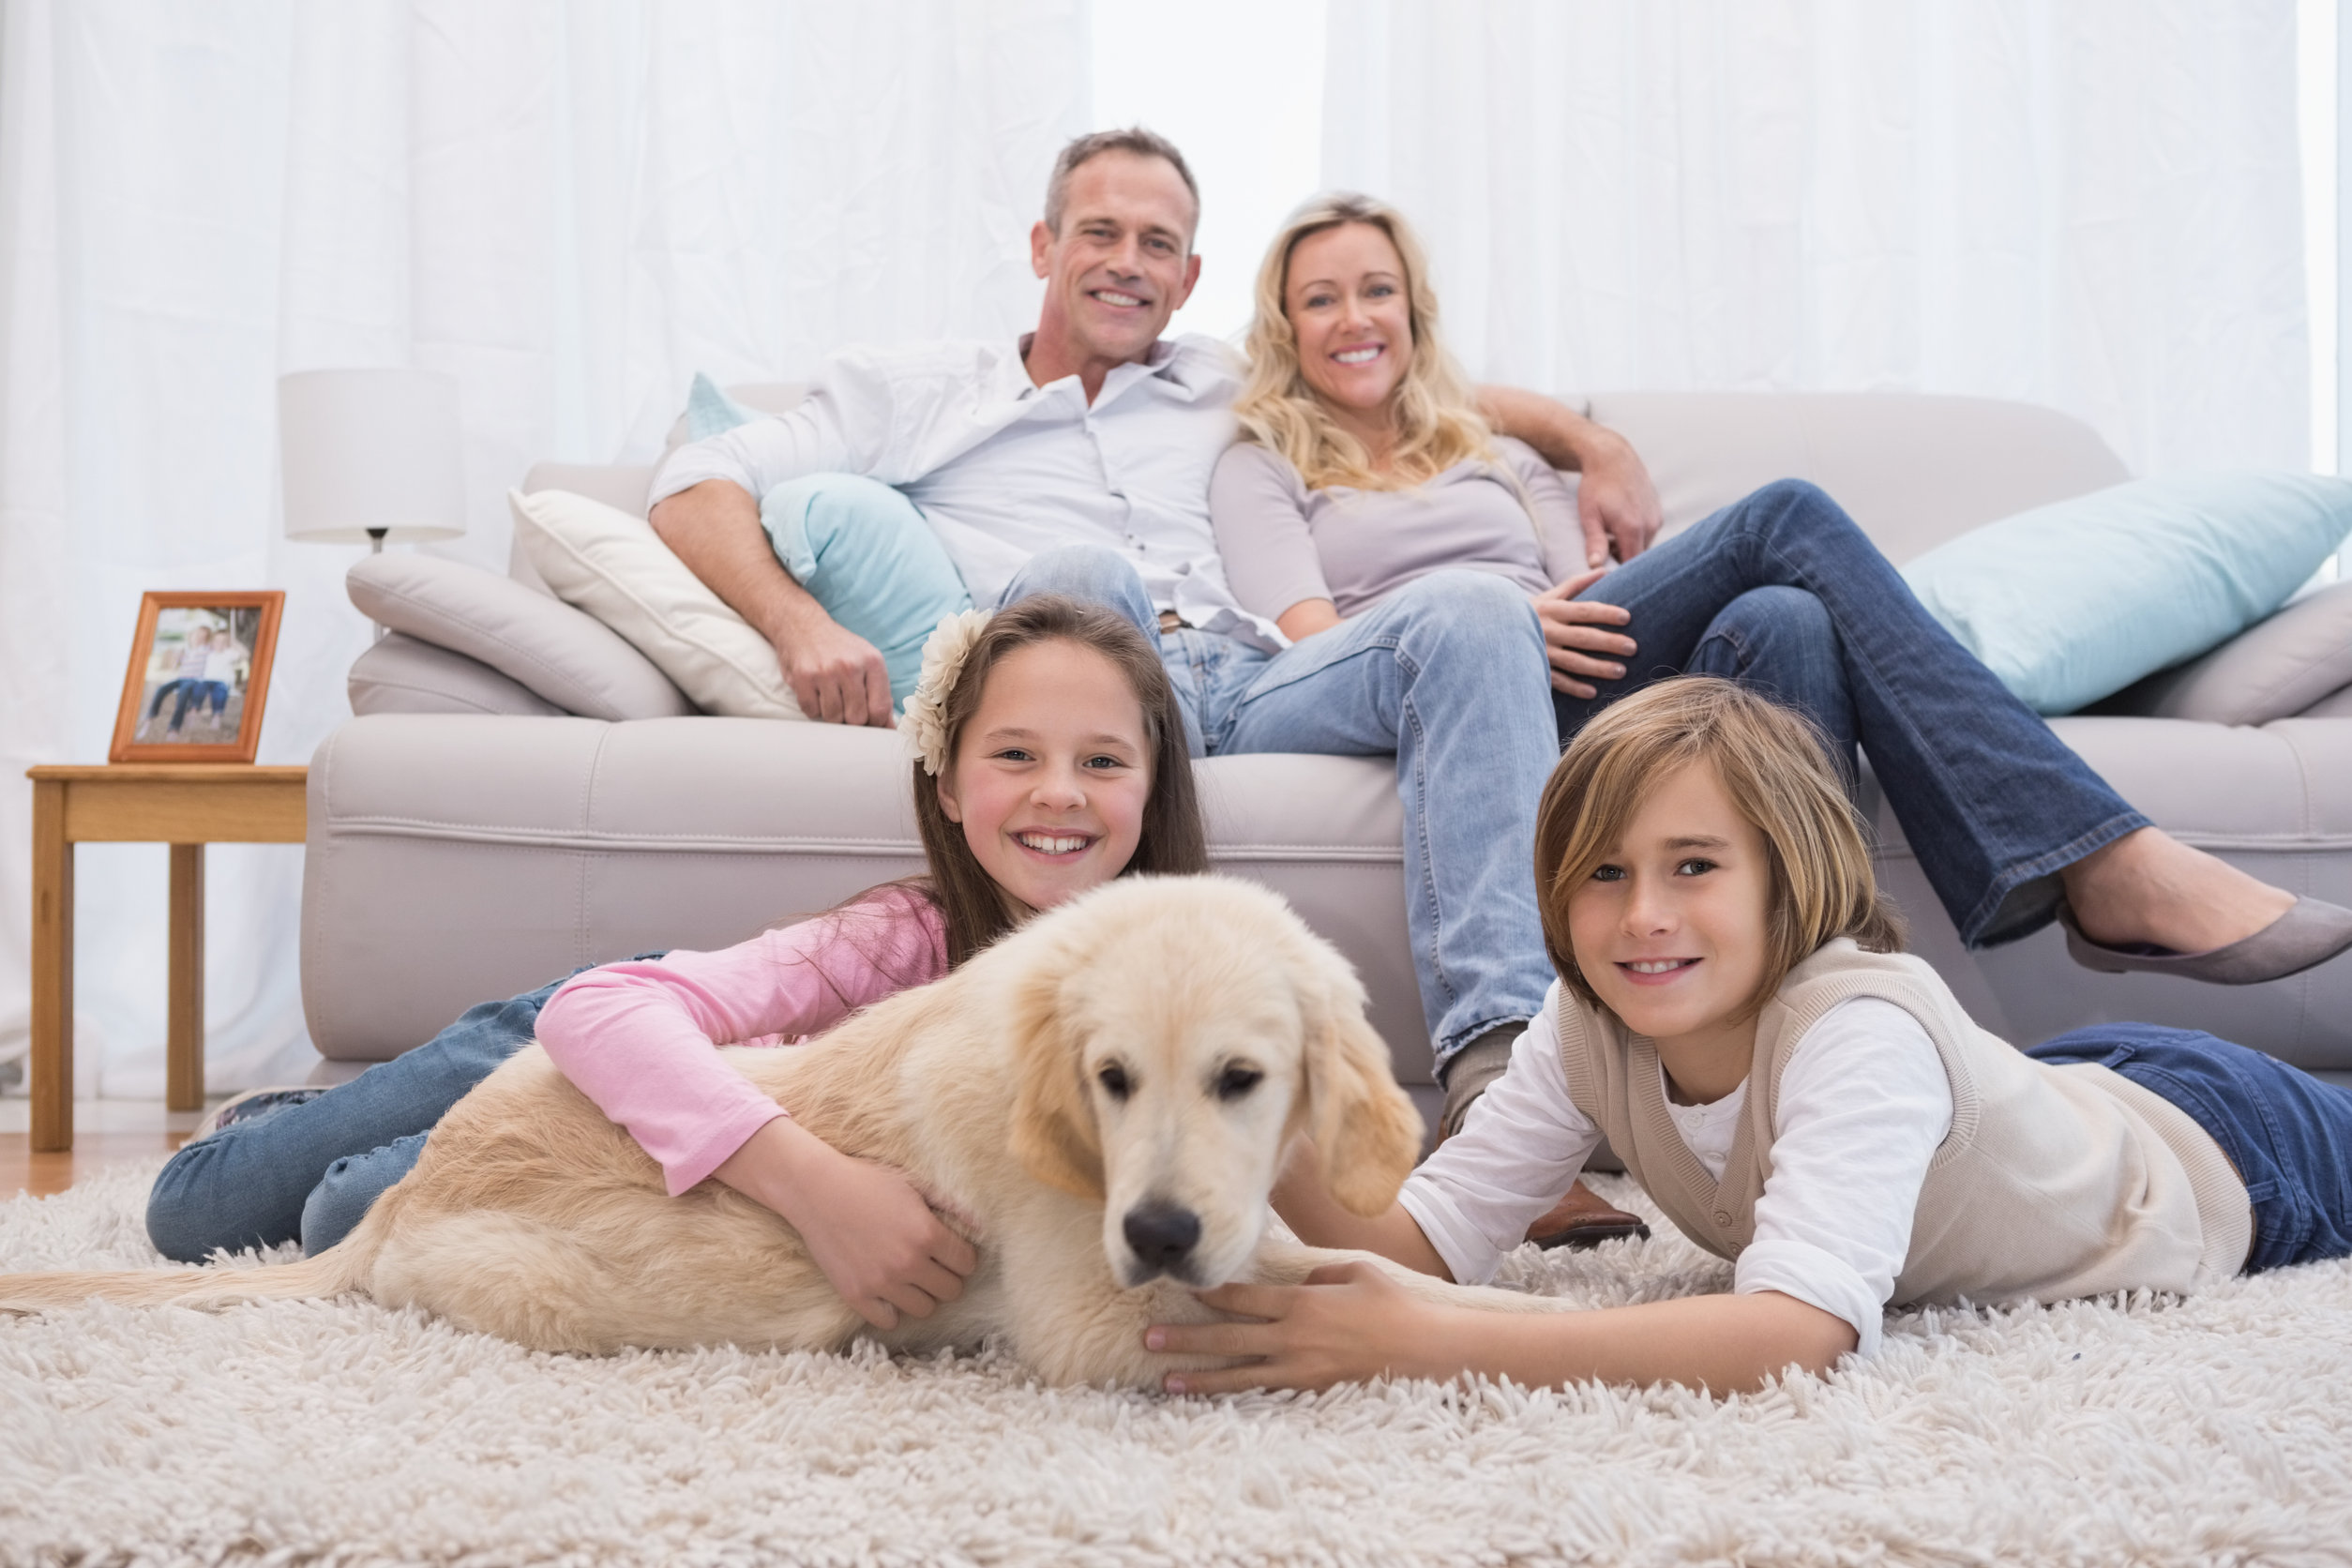 dog on carpet with family